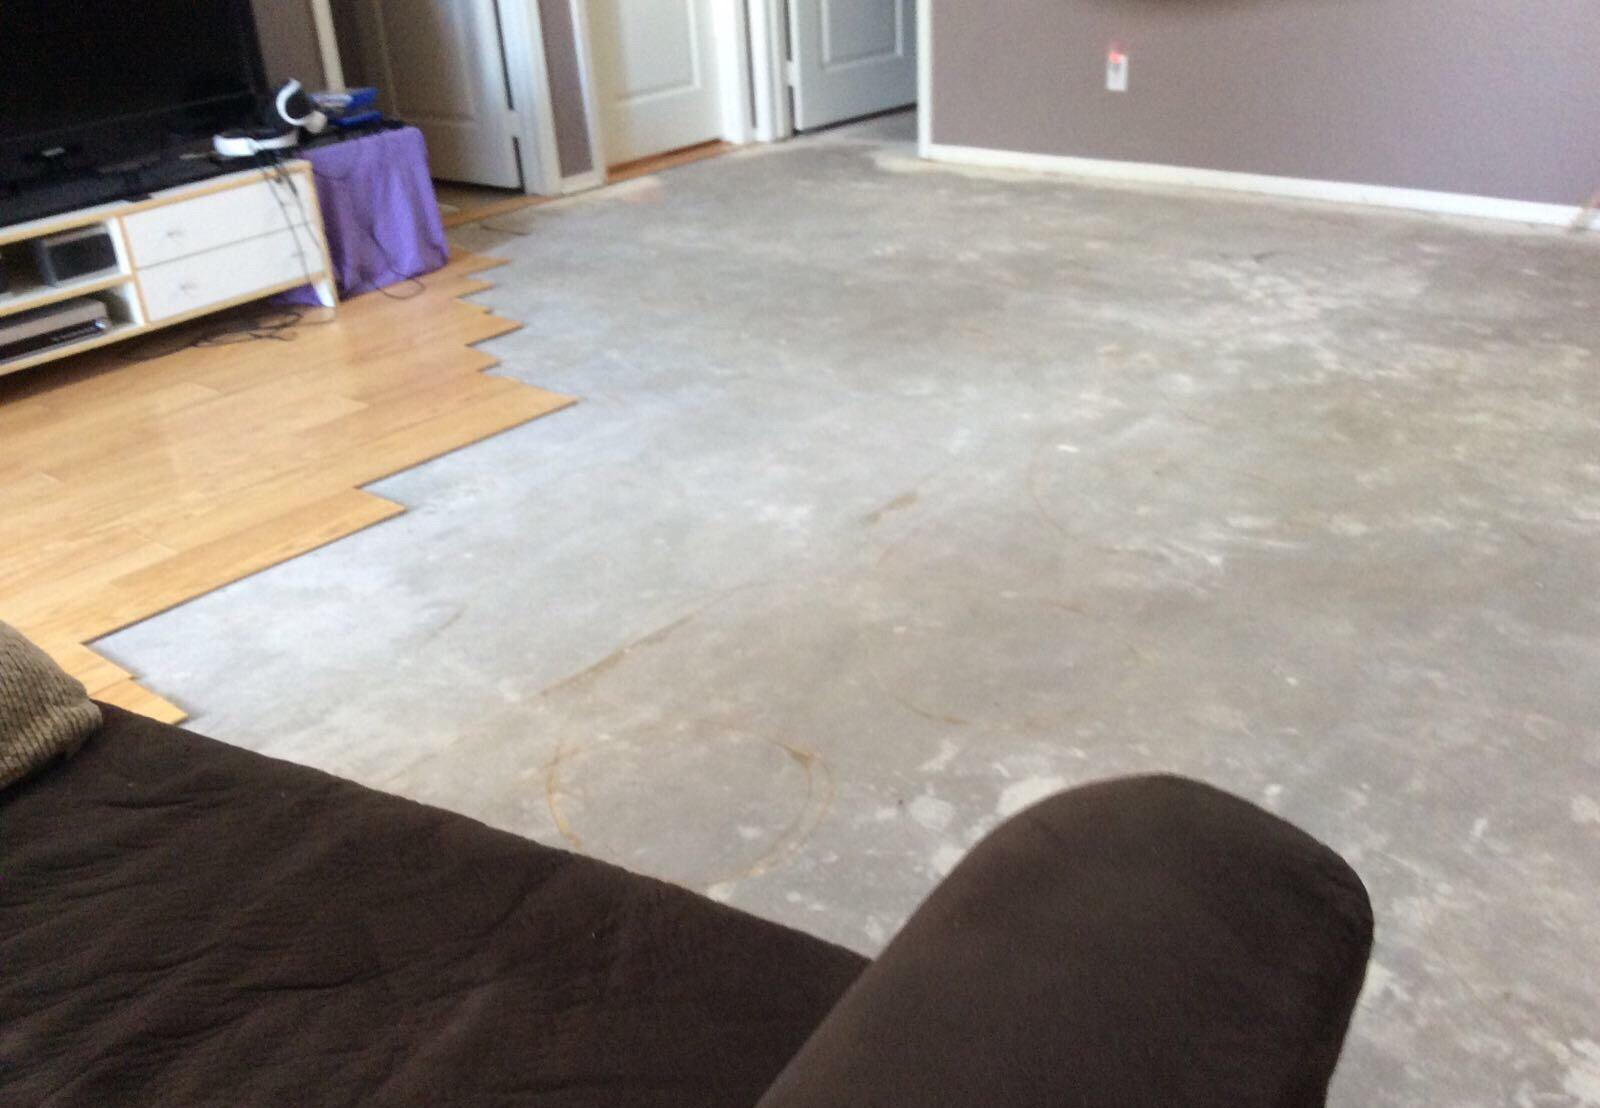 Removing the flooring in this home was necessary due to the type of water damage that occured.